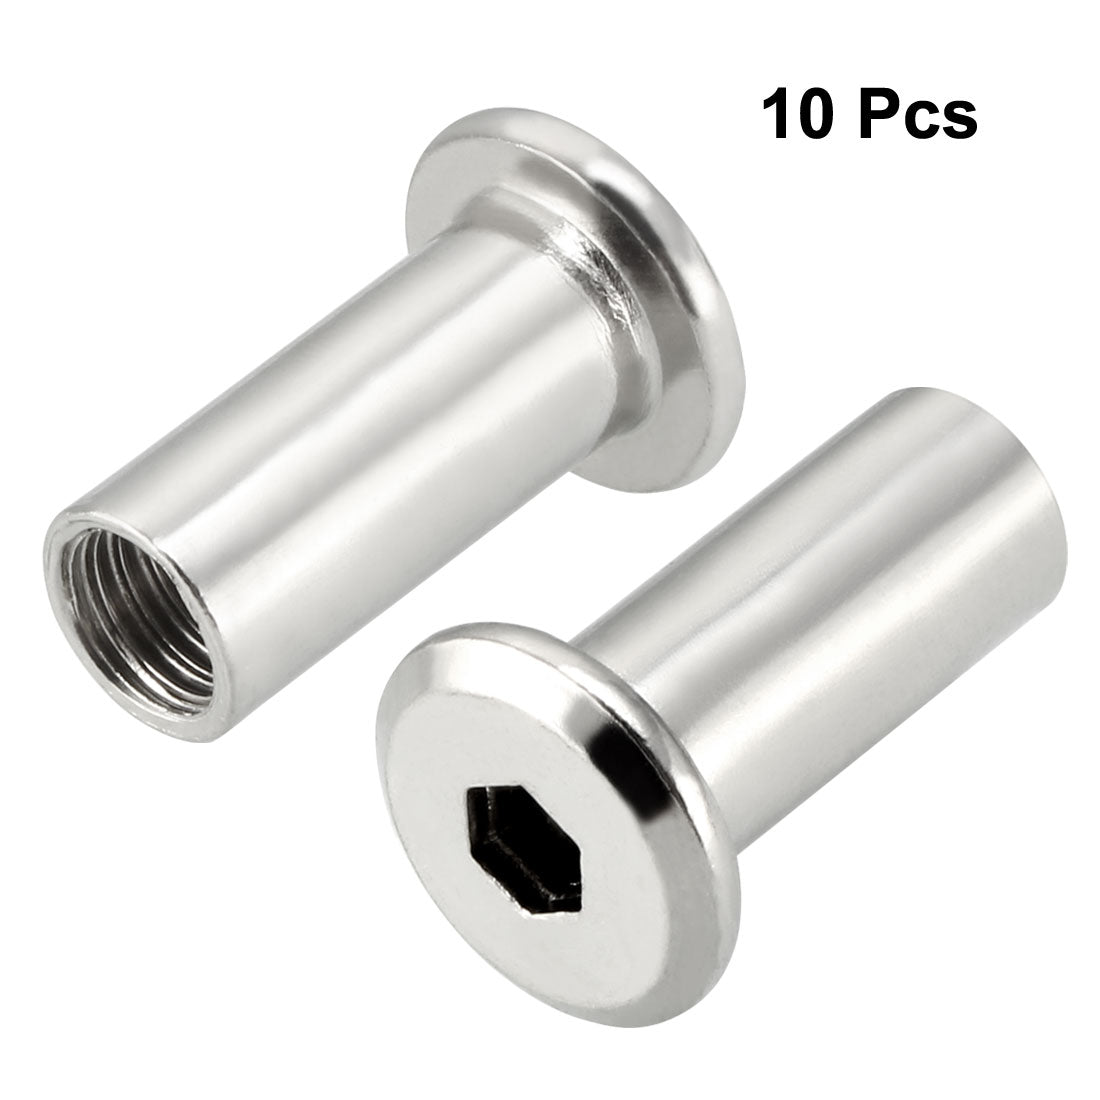 uxcell Uxcell M8x22mm Hex Socket Head Insert Nut Screw Post Sleeve Nut for Furniture 10pcs